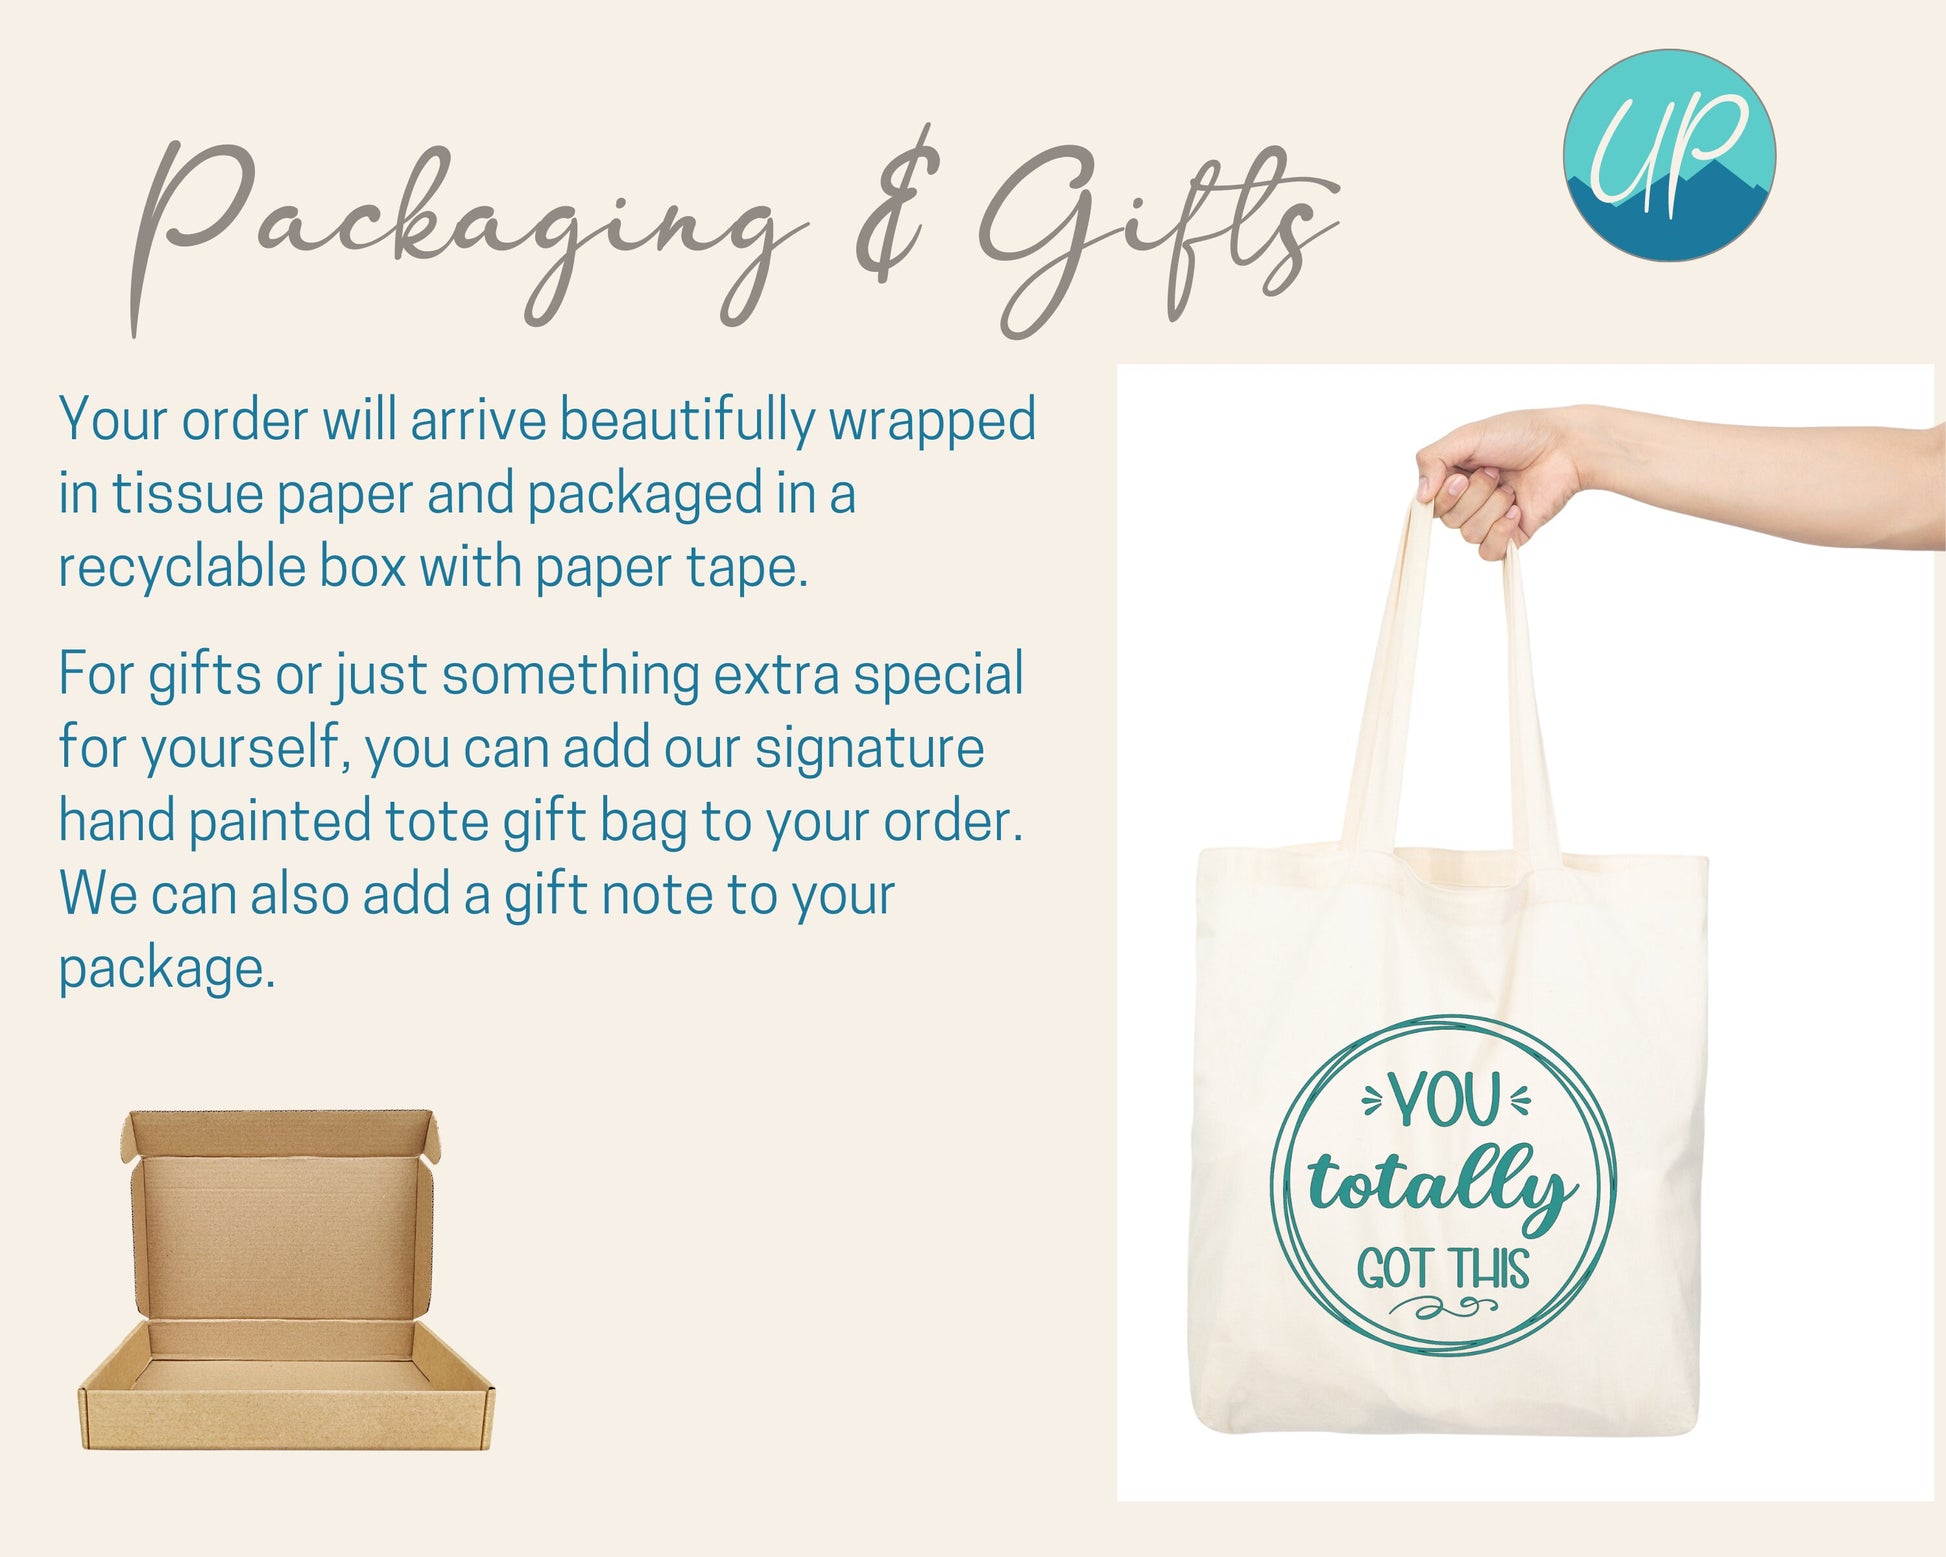 Information page with brand logo showing packaging and gifting options. Hand holding natural colored tote bag with teal design of three large overlapping thin circles with message inside, You totally got this. Wrapped in tissue paper as standard.